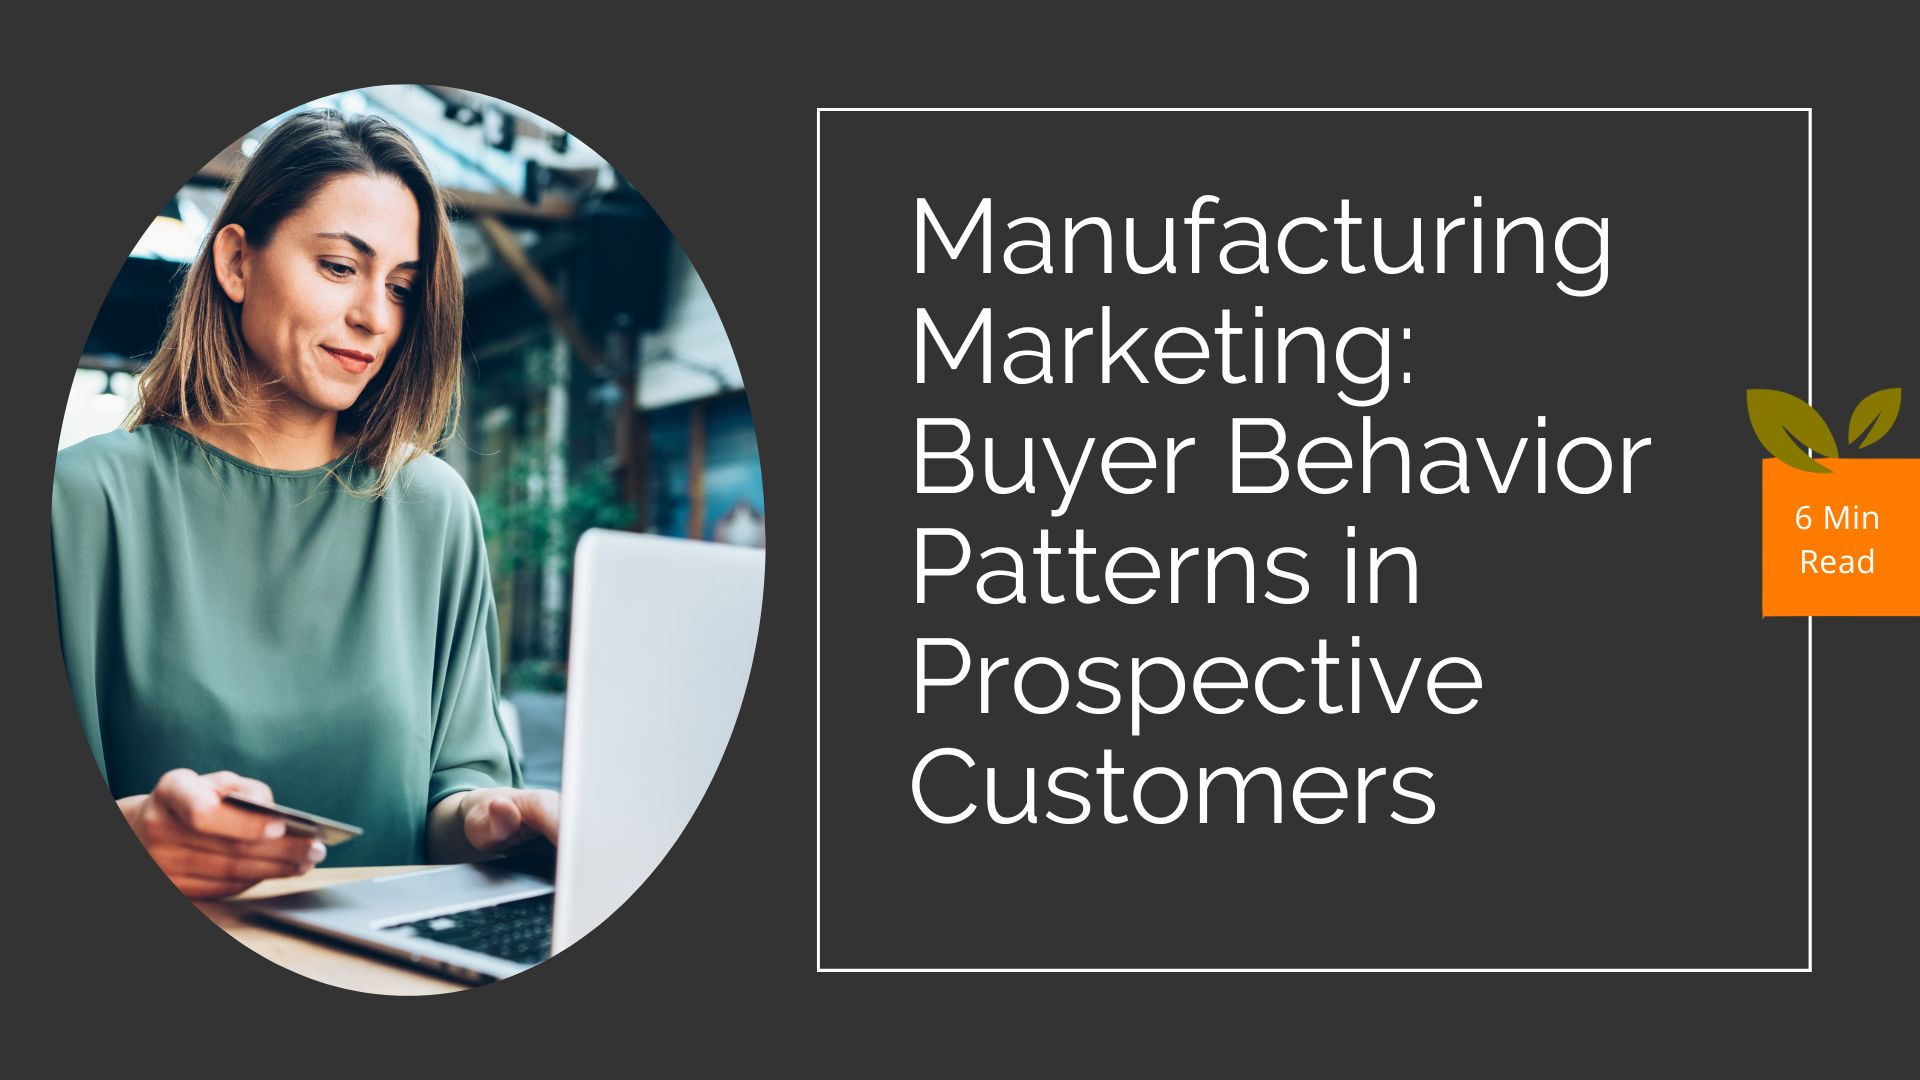 Manufacturing Marketing Prospective Customers